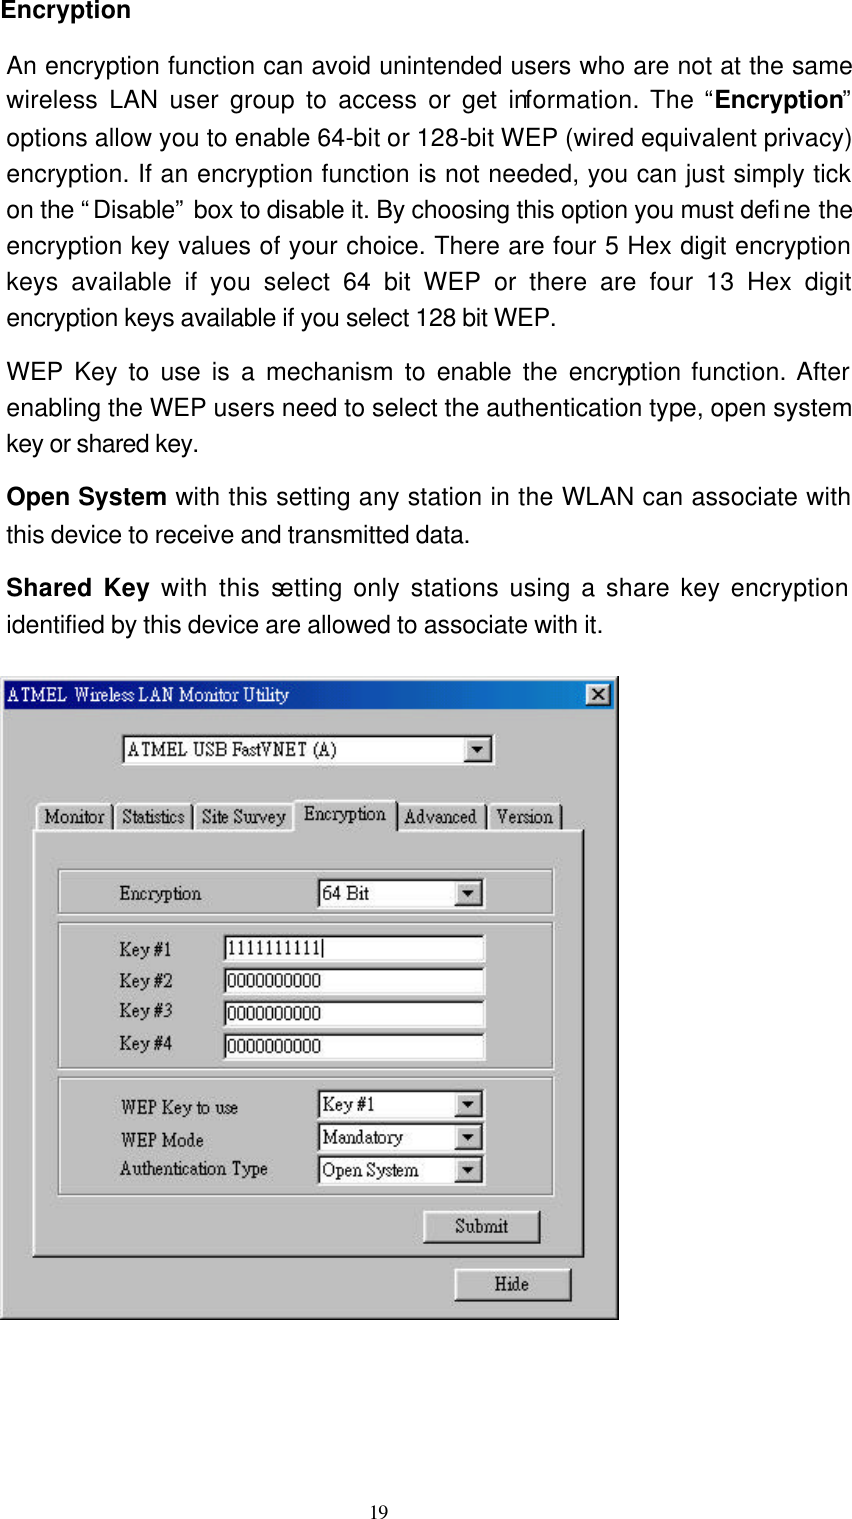   19 Encryption   An encryption function can avoid unintended users who are not at the same wireless LAN user group to access or get information. The “Encryption” options allow you to enable 64-bit or 128-bit WEP (wired equivalent privacy) encryption. If an encryption function is not needed, you can just simply tick on the “Disable” box to disable it. By choosing this option you must define the encryption key values of your choice. There are four 5 Hex digit encryption keys available if you select 64 bit WEP or there are four 13 Hex digit encryption keys available if you select 128 bit WEP. WEP Key to use is a mechanism to enable the encryption function. After enabling the WEP users need to select the authentication type, open system key or shared key. Open System with this setting any station in the WLAN can associate with this device to receive and transmitted data. Shared Key with this setting only stations using a share key encryption identified by this device are allowed to associate with it.       